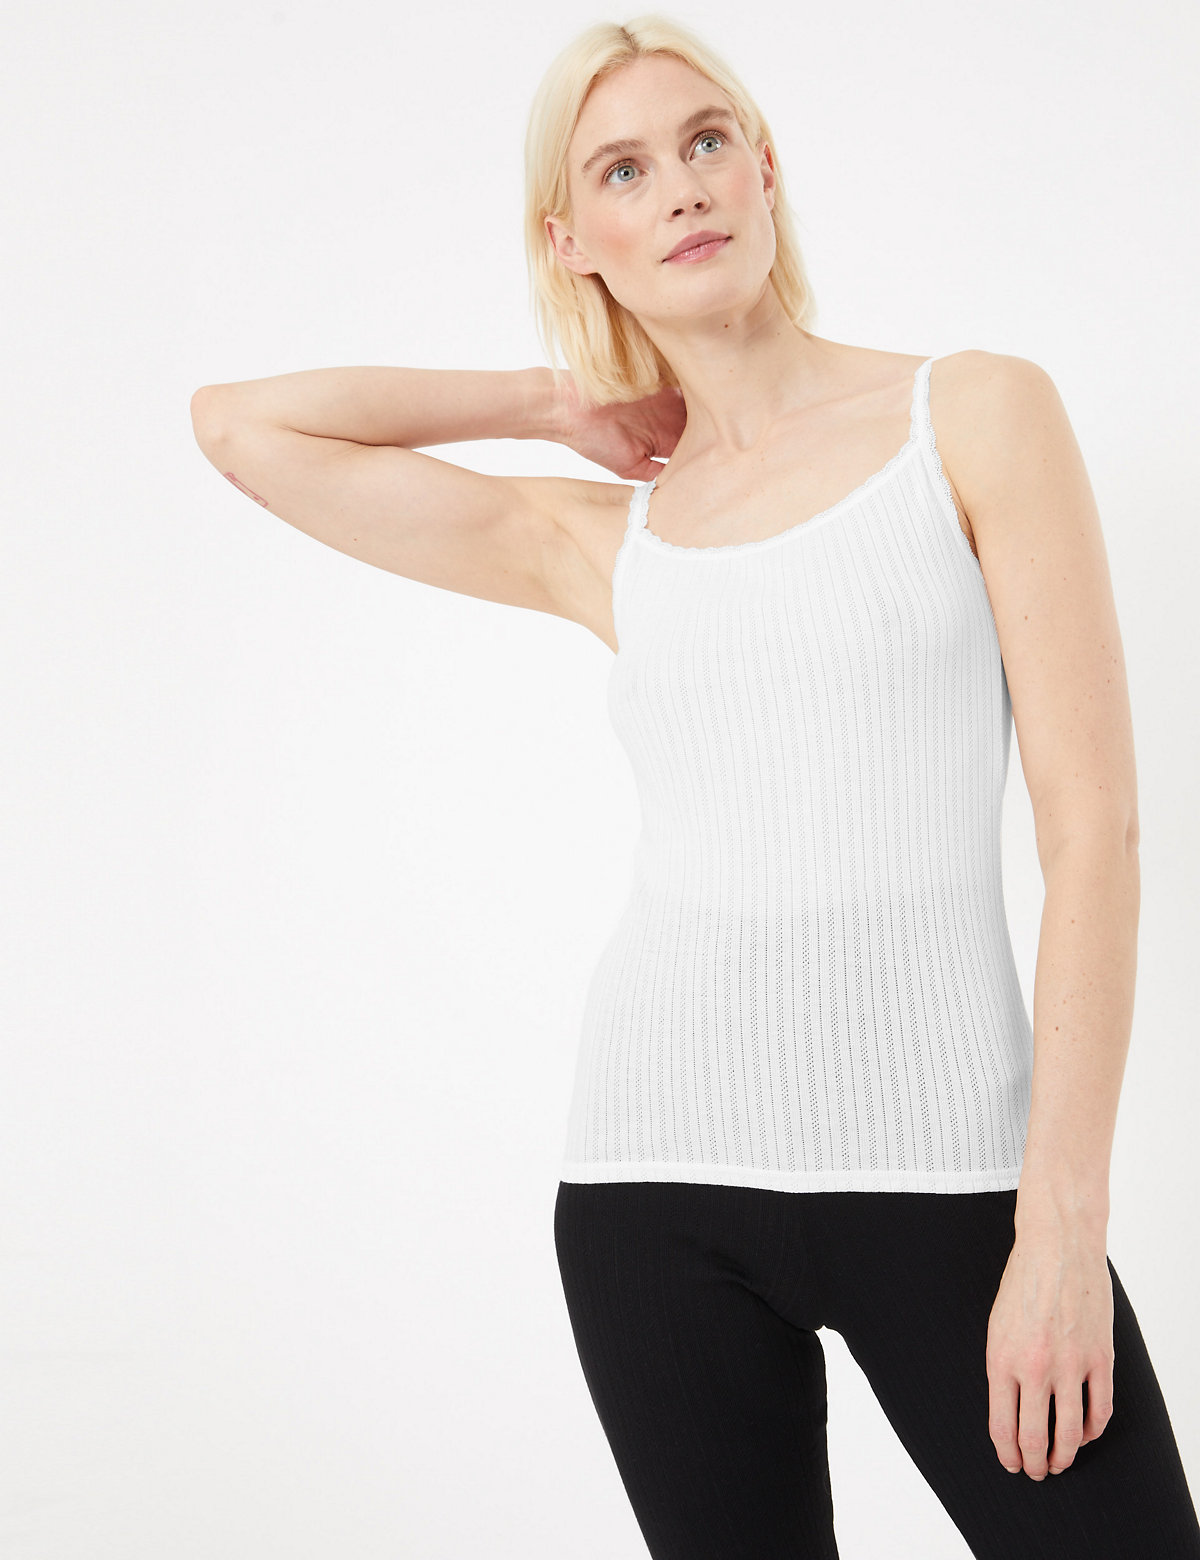 2pk Thermal Pointelle Vests